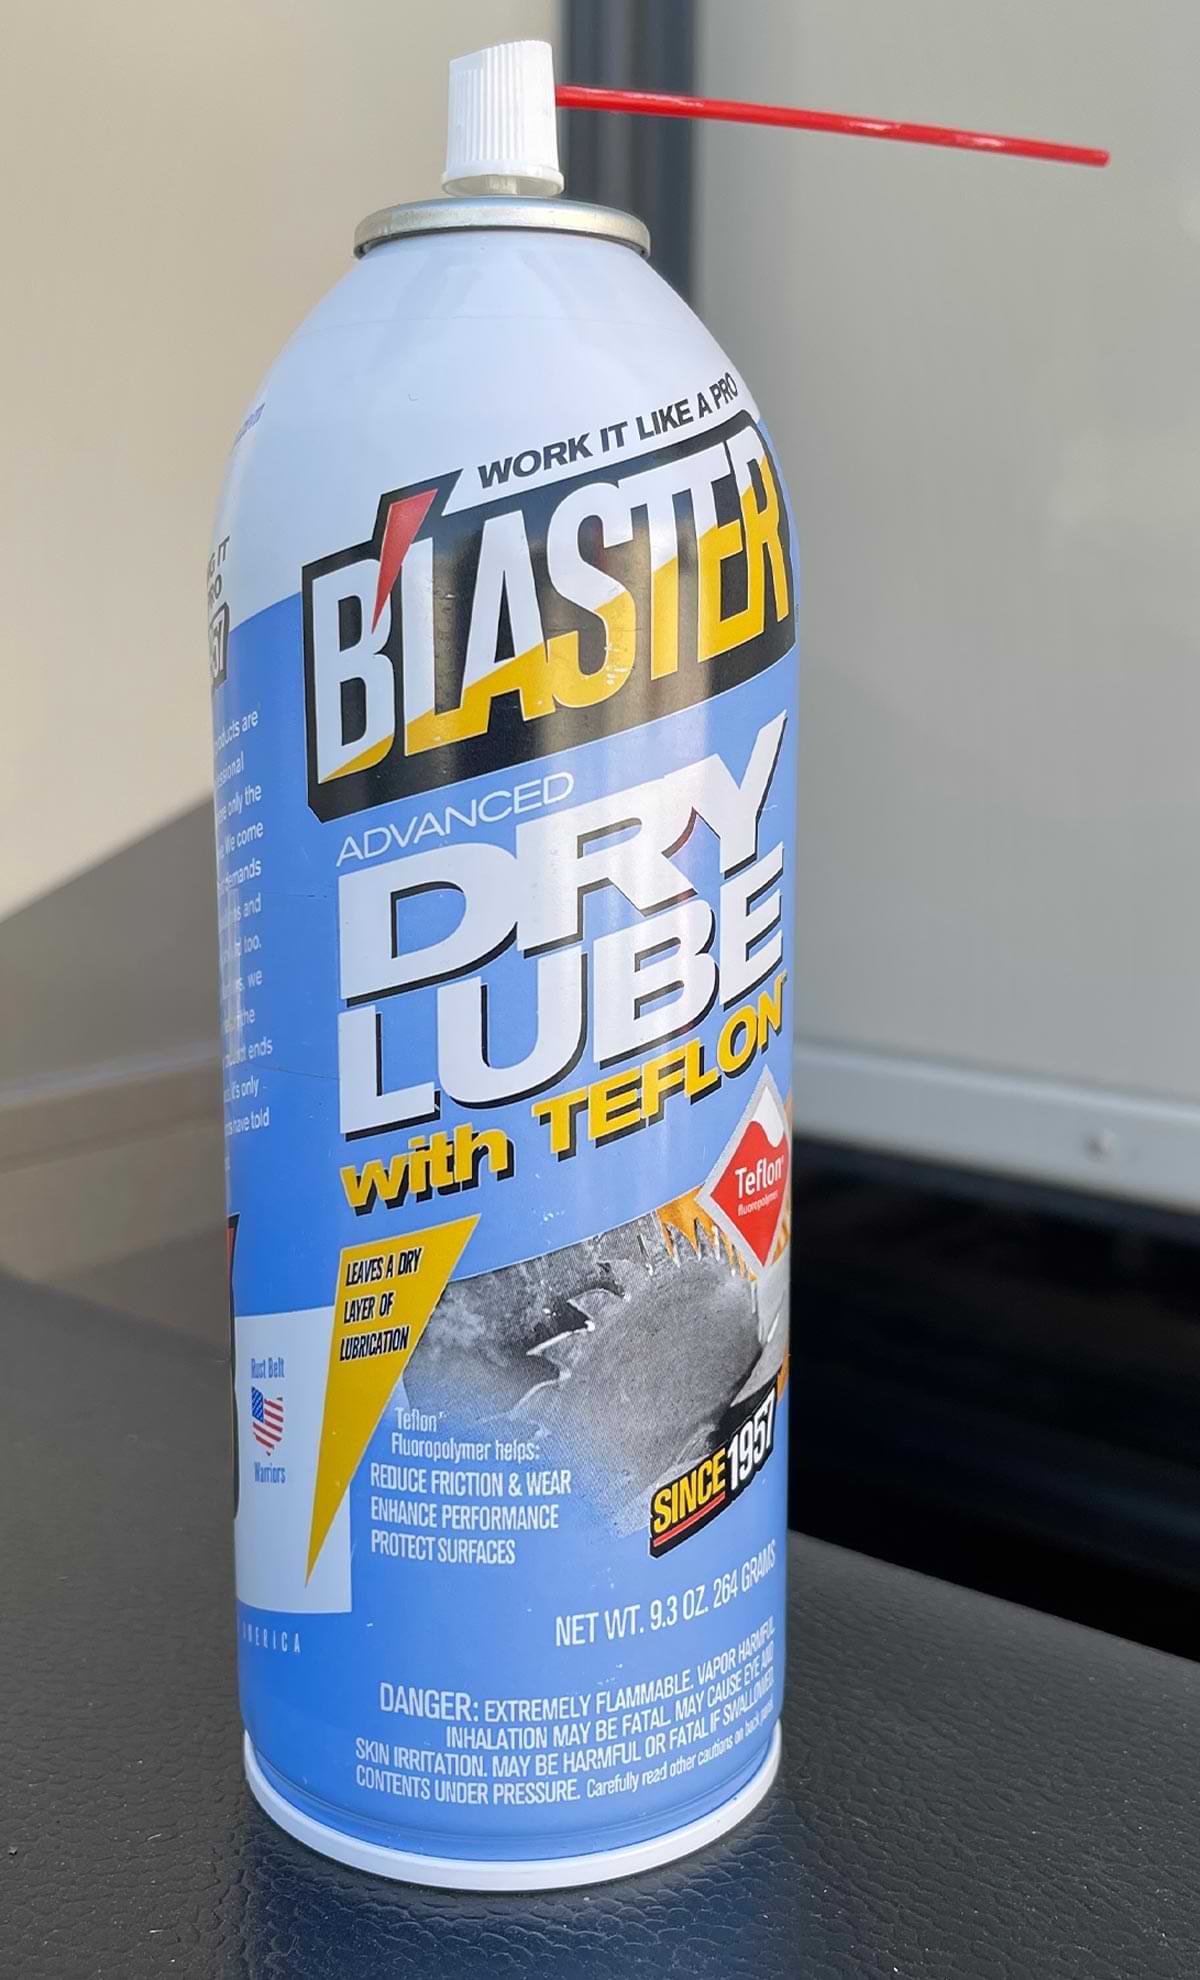 lose view of a spray container of Blaster Advanced Dry Lube with Teflon